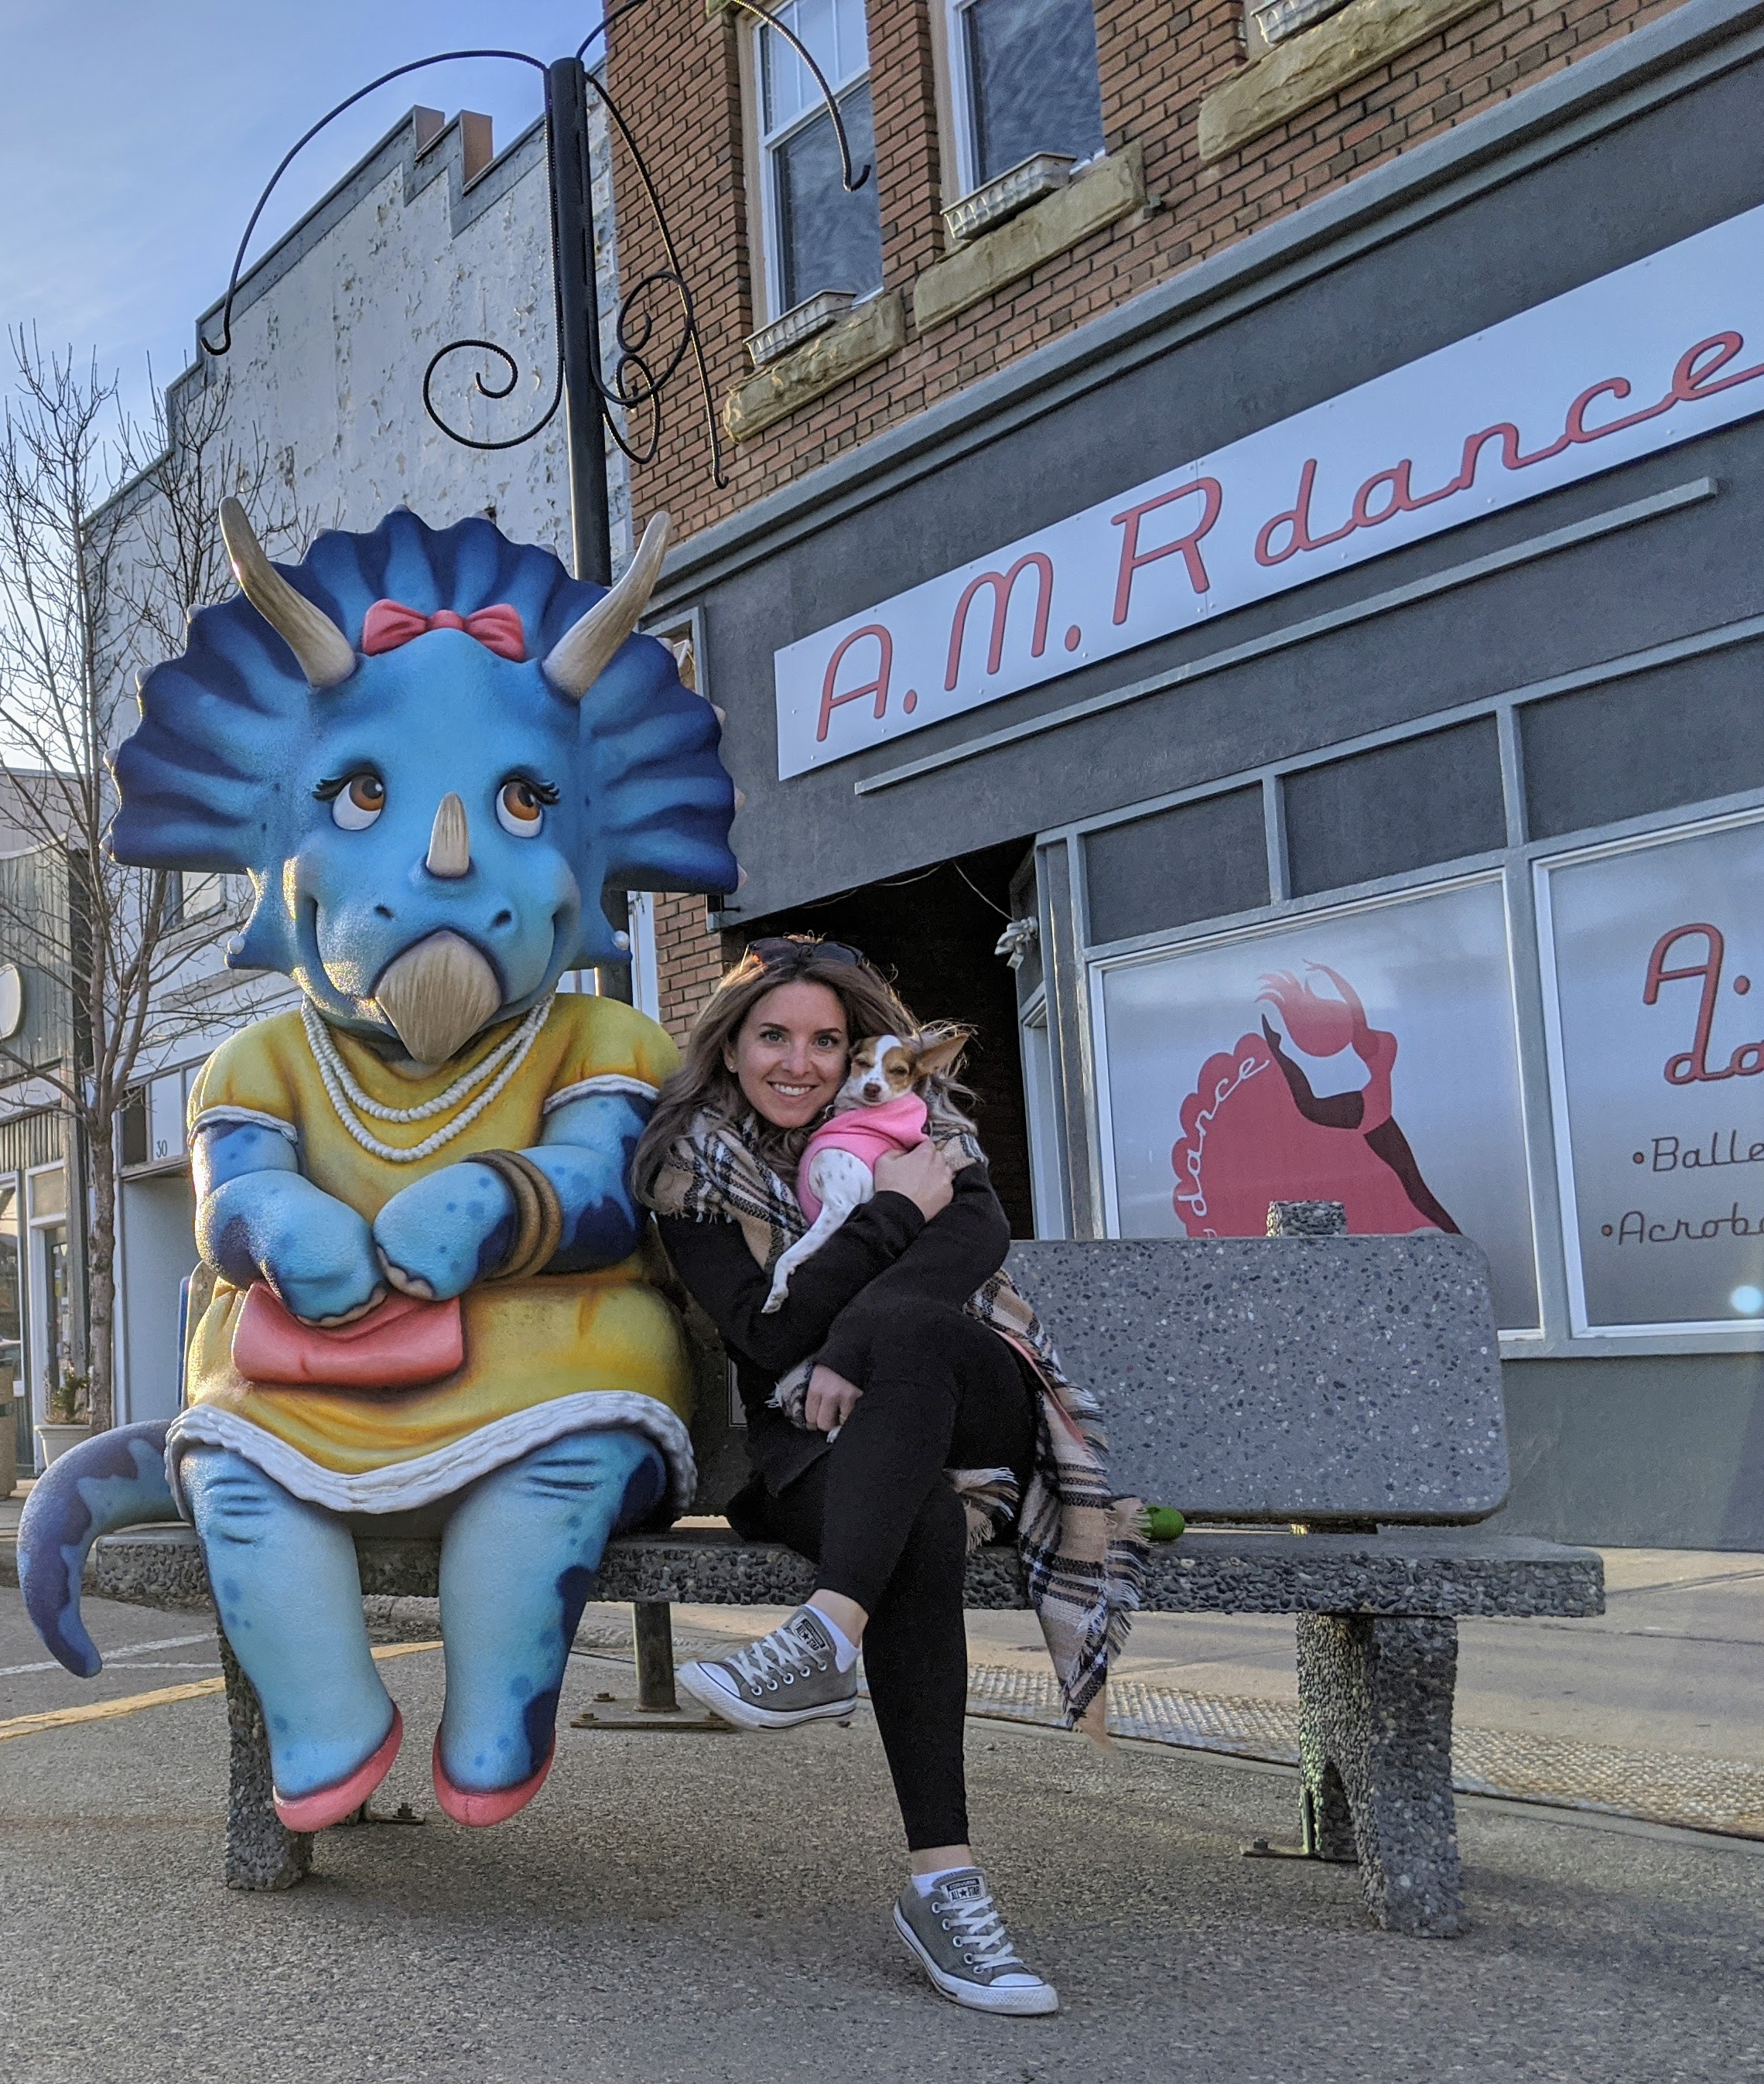 a girl sitting on a bench beside a blue triceratops dinosaur statue